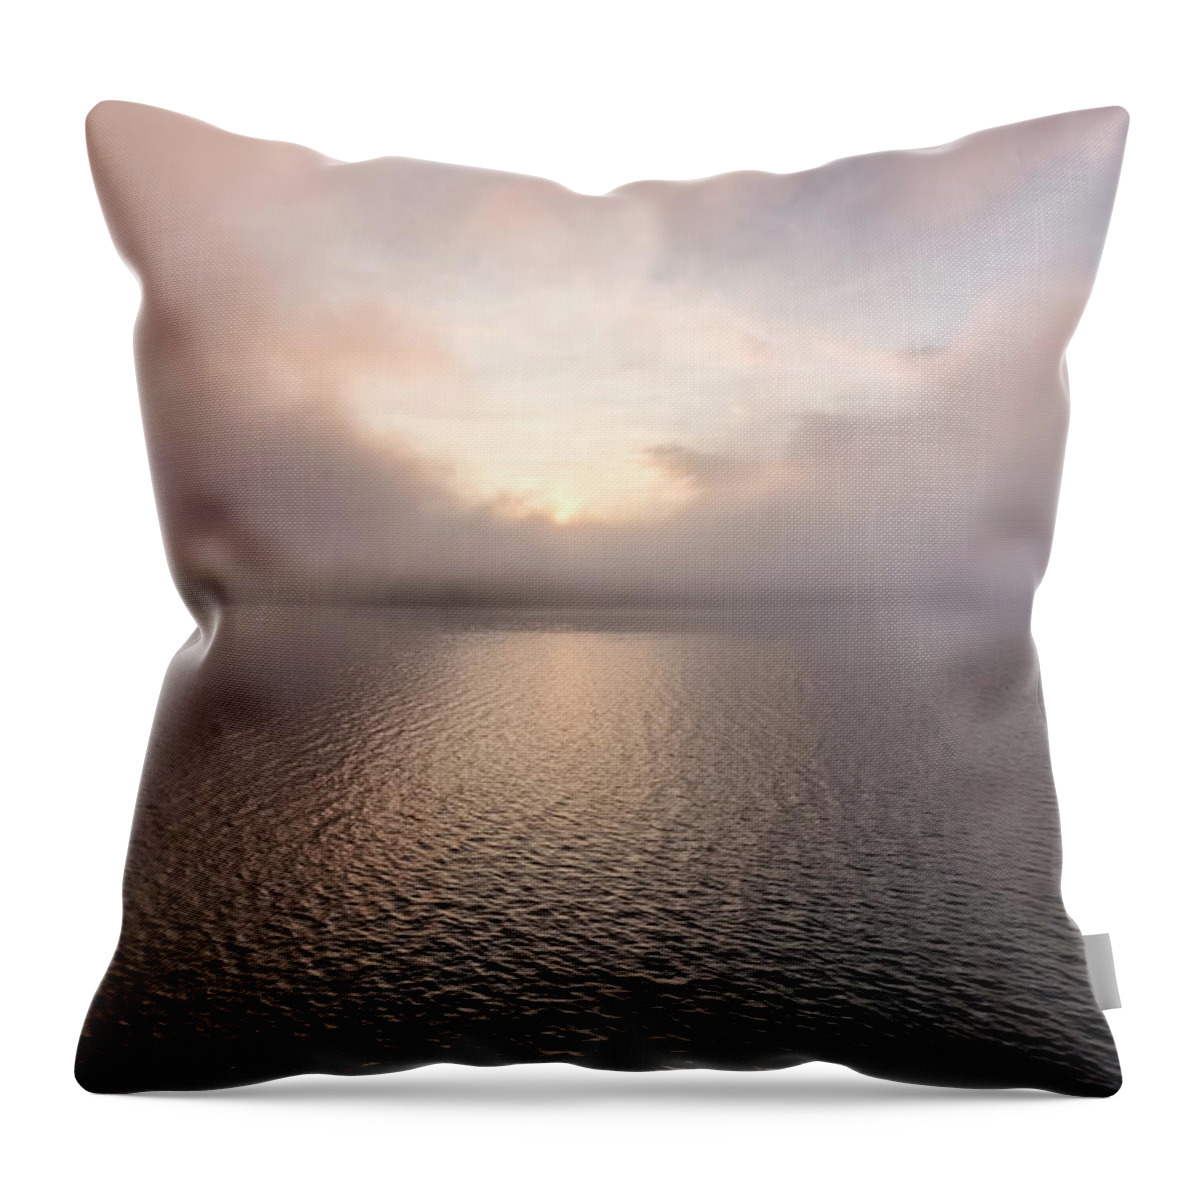 Spofford Lake New Hampshire Throw Pillow featuring the photograph Misty Morning II by Tom Singleton